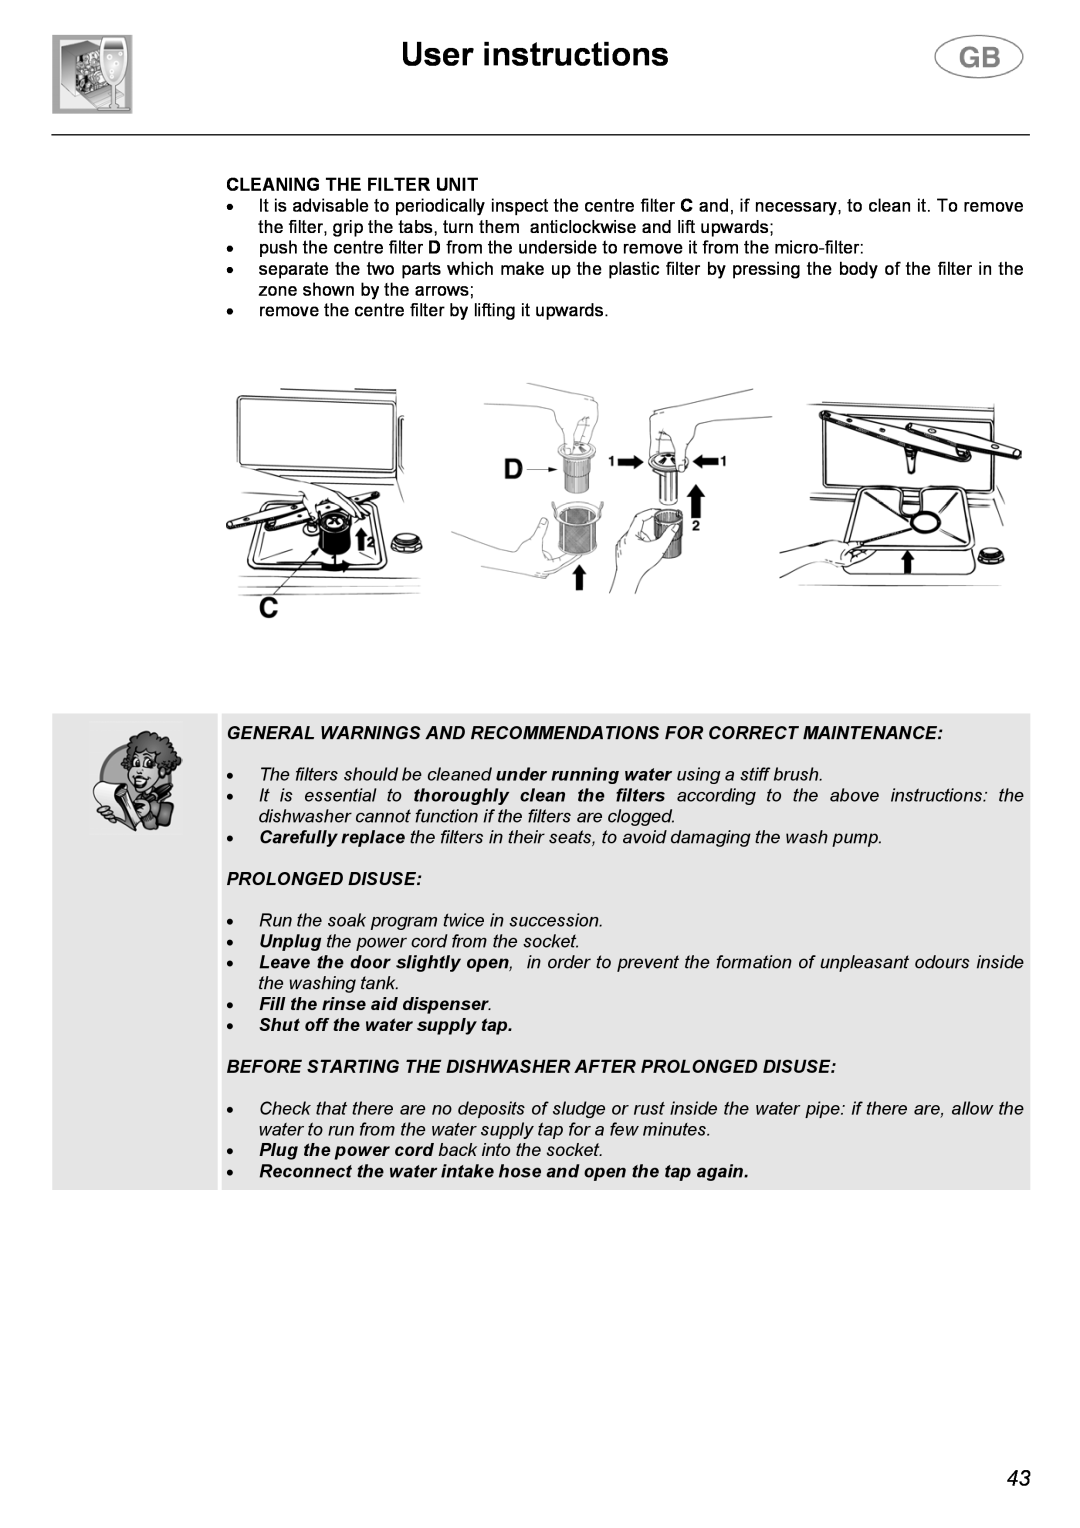 Smeg EL05 instruction manual User instructions, Cleaning The Filter Unit, Prolonged Disuse, Fill the rinse aid dispenser 